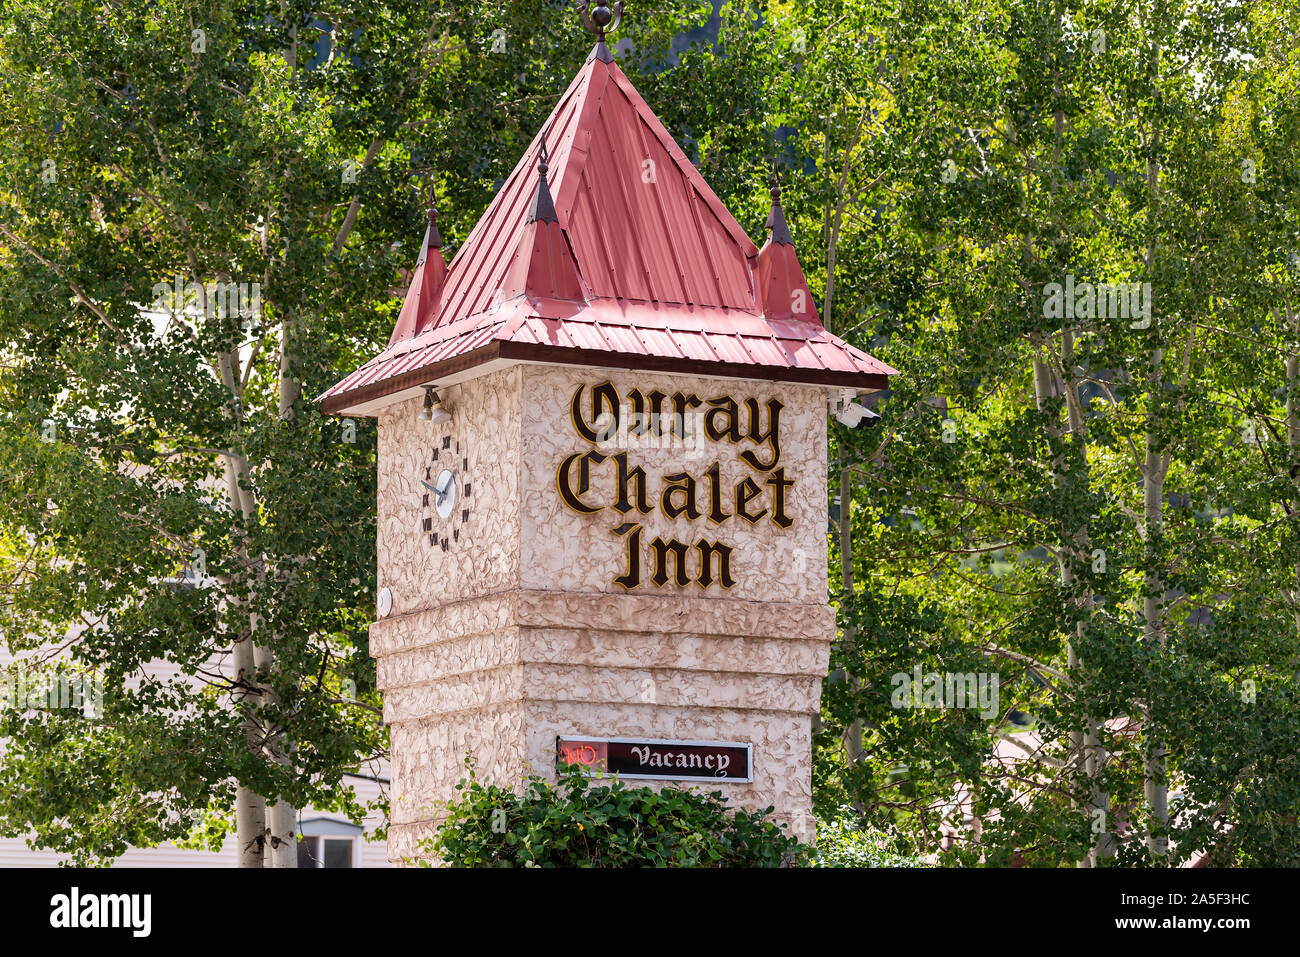 Ouray, USA - August 14, 2019: Small town in Colorado with city main street and closeup of chalet inn hotel sign historic architecture clock tower Stock Photo